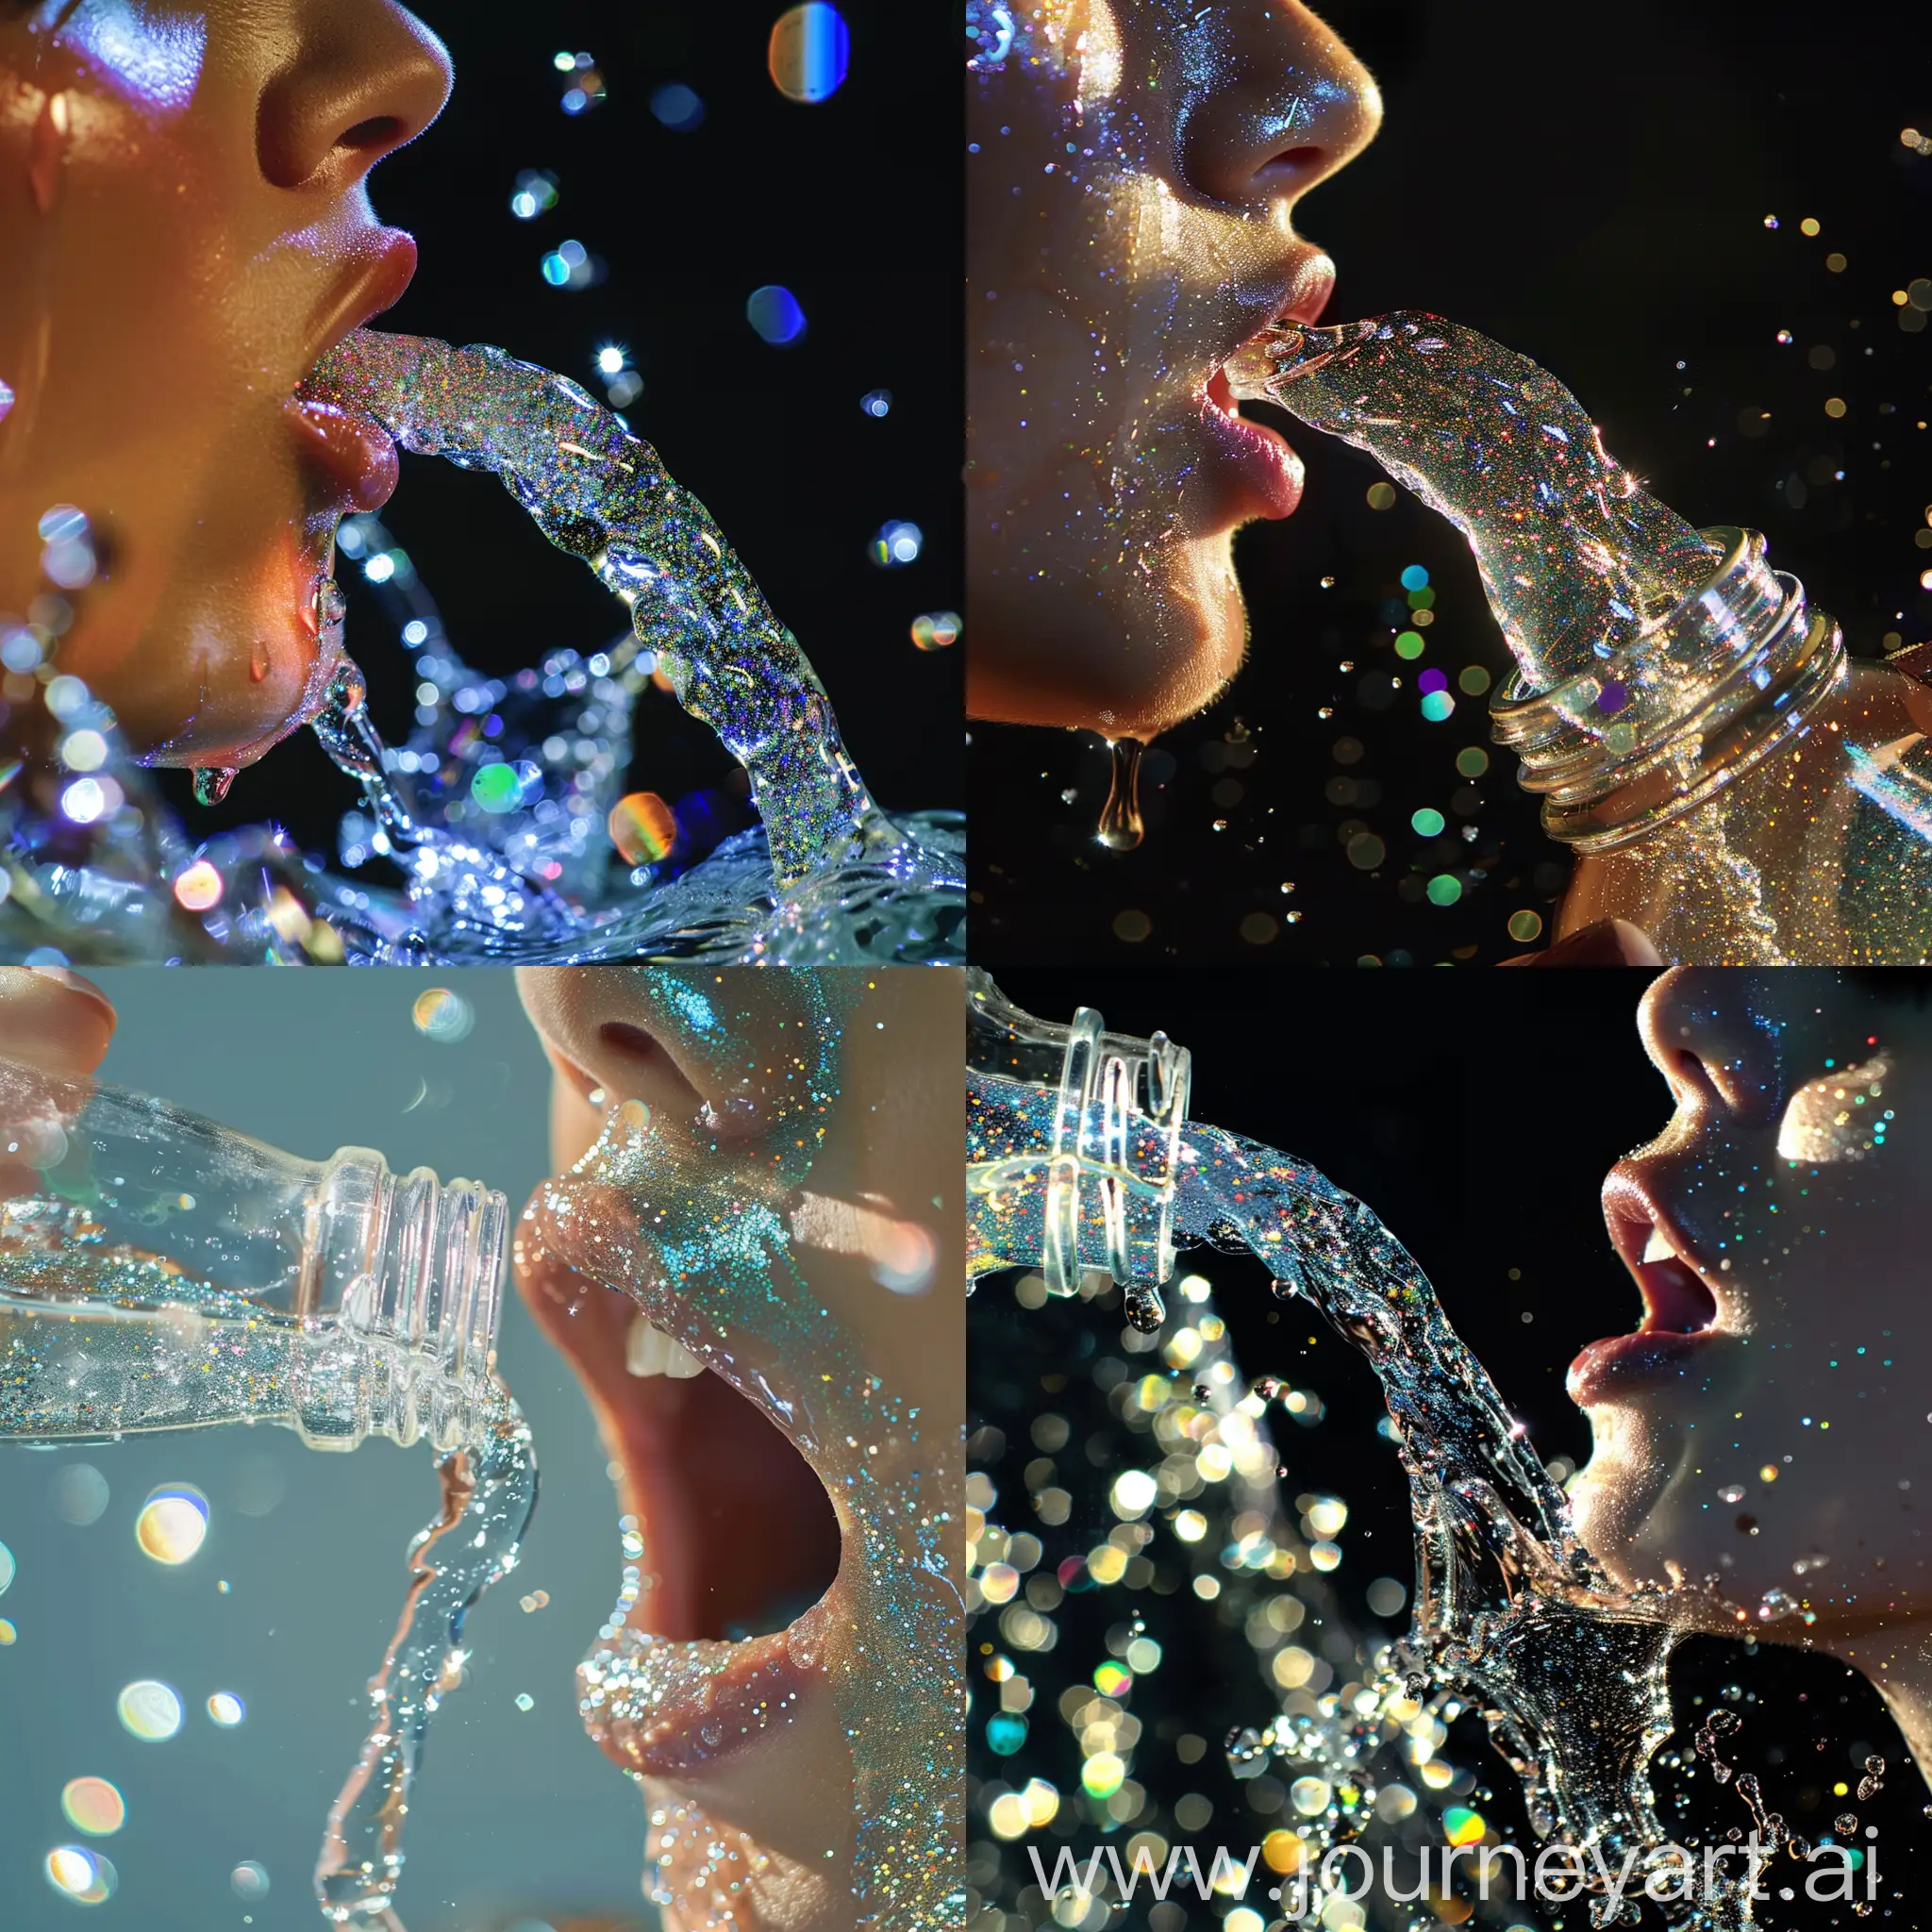 Sparkling-Water-Pouring-into-Womans-Mouth-from-Elegant-Glass-Bottle